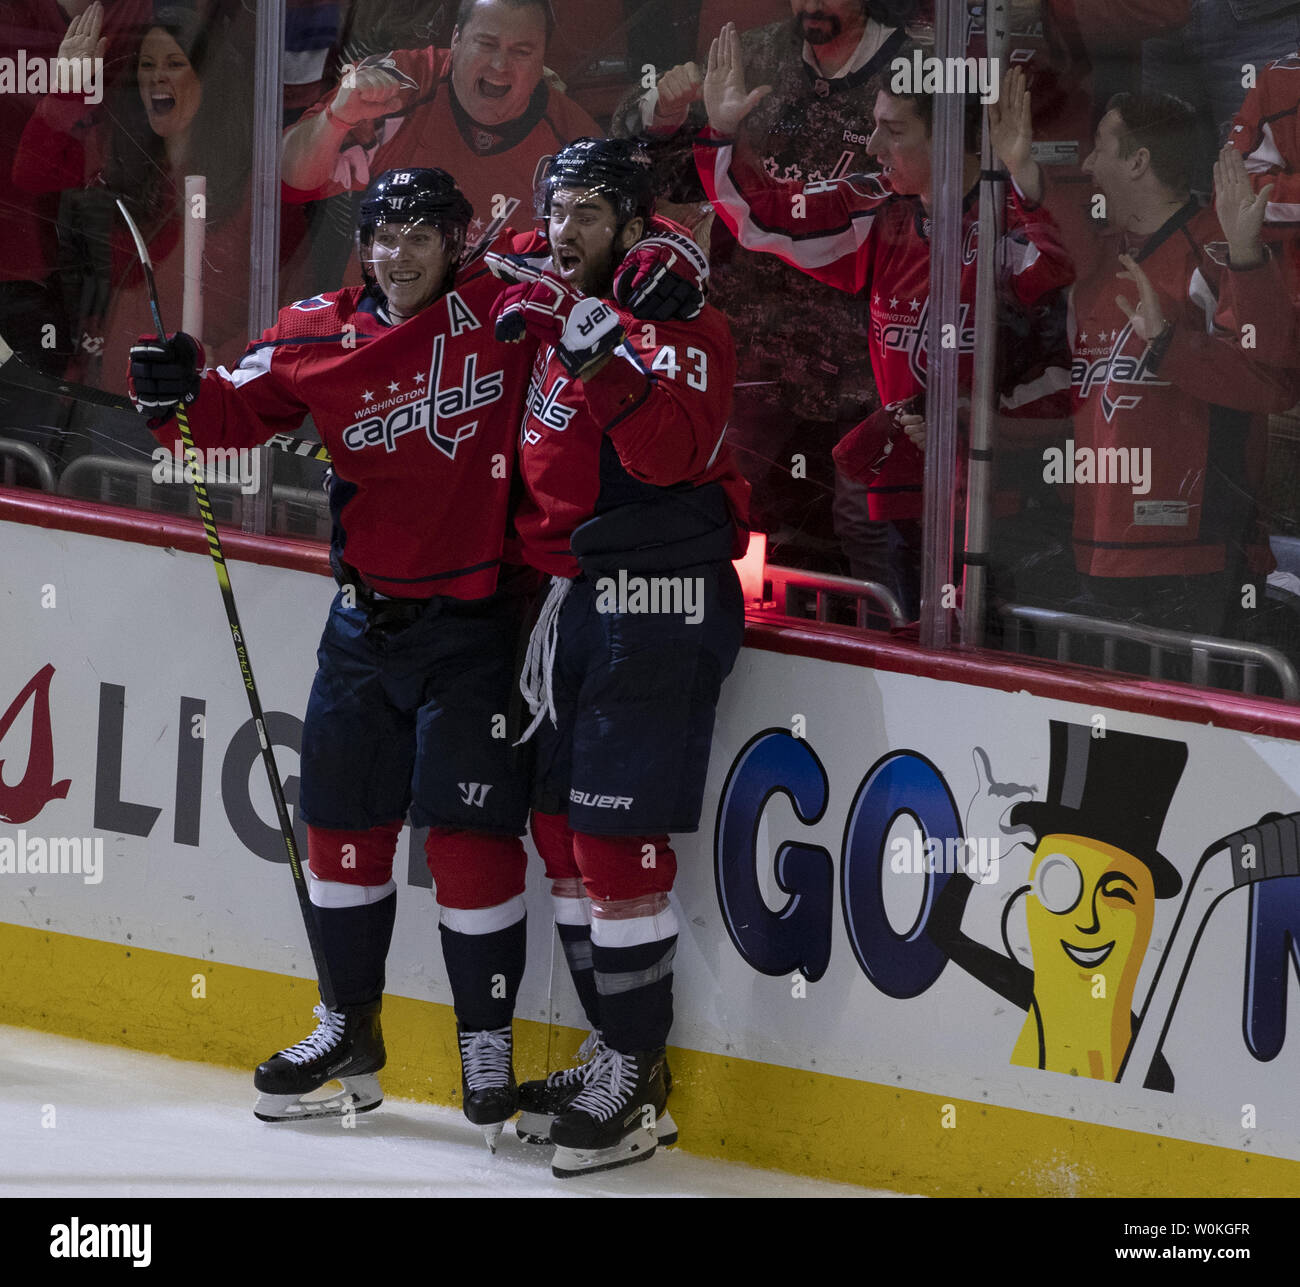 Washington Capitals right wing Tom Wilson (43) celebrates with Capitals center Nicklas Backstrom (19) after scoring on Carolina Hurricanes goaltender Petr Mrazek (34) during the third period at Capital One Arena in Washington, D.C. on April 13, 2019. The Washington Capitals lead the best of seven series with one win. Photo by Alex Edelman/UPI Stock Photo